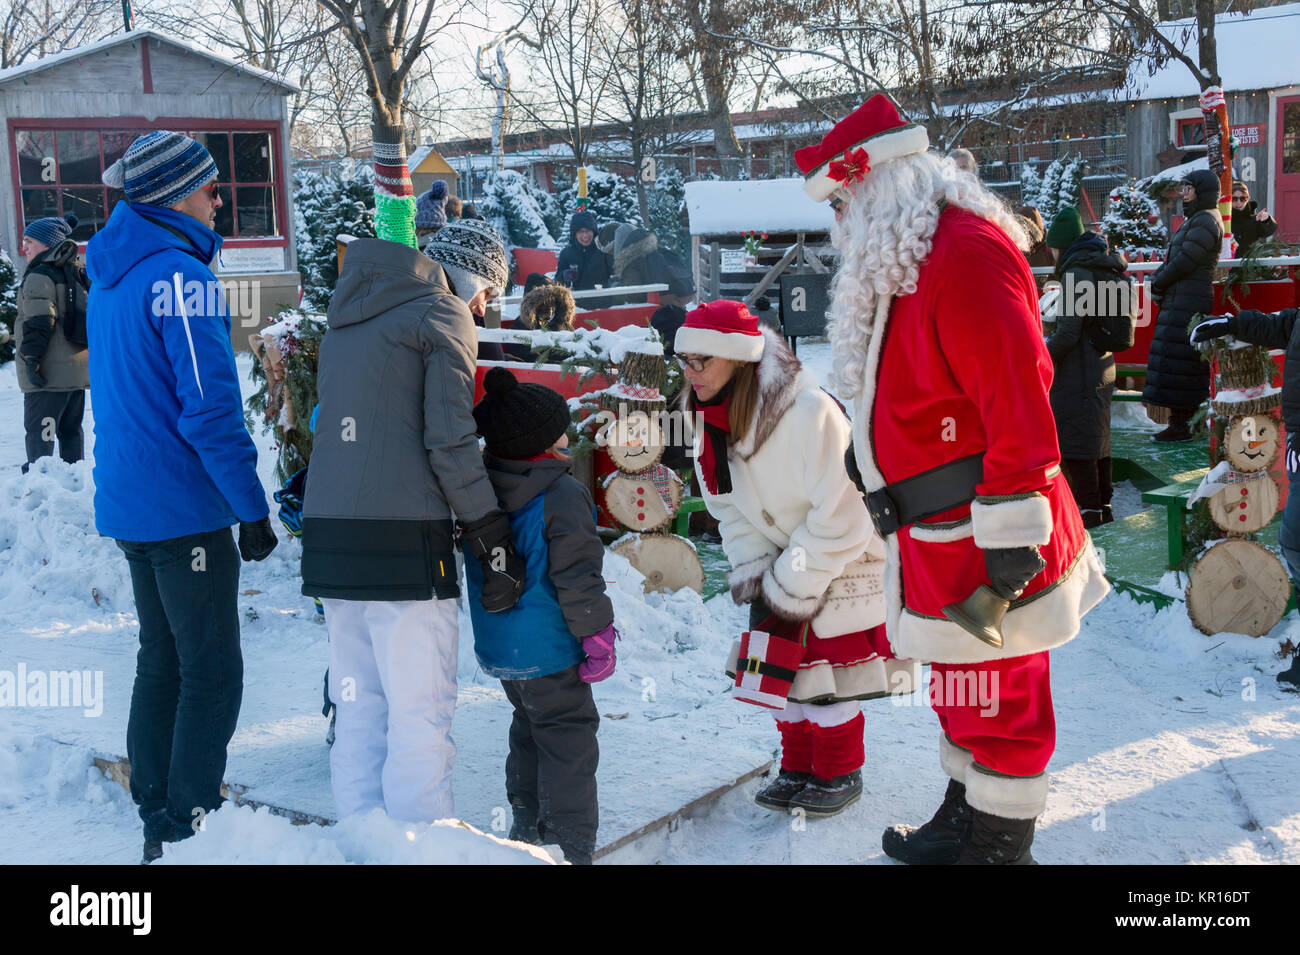 Montreal, Canada - 16 December 2017: Santa Claus and Mother Christmas talking to a child at the 'Christmas in the park' festival Stock Photo